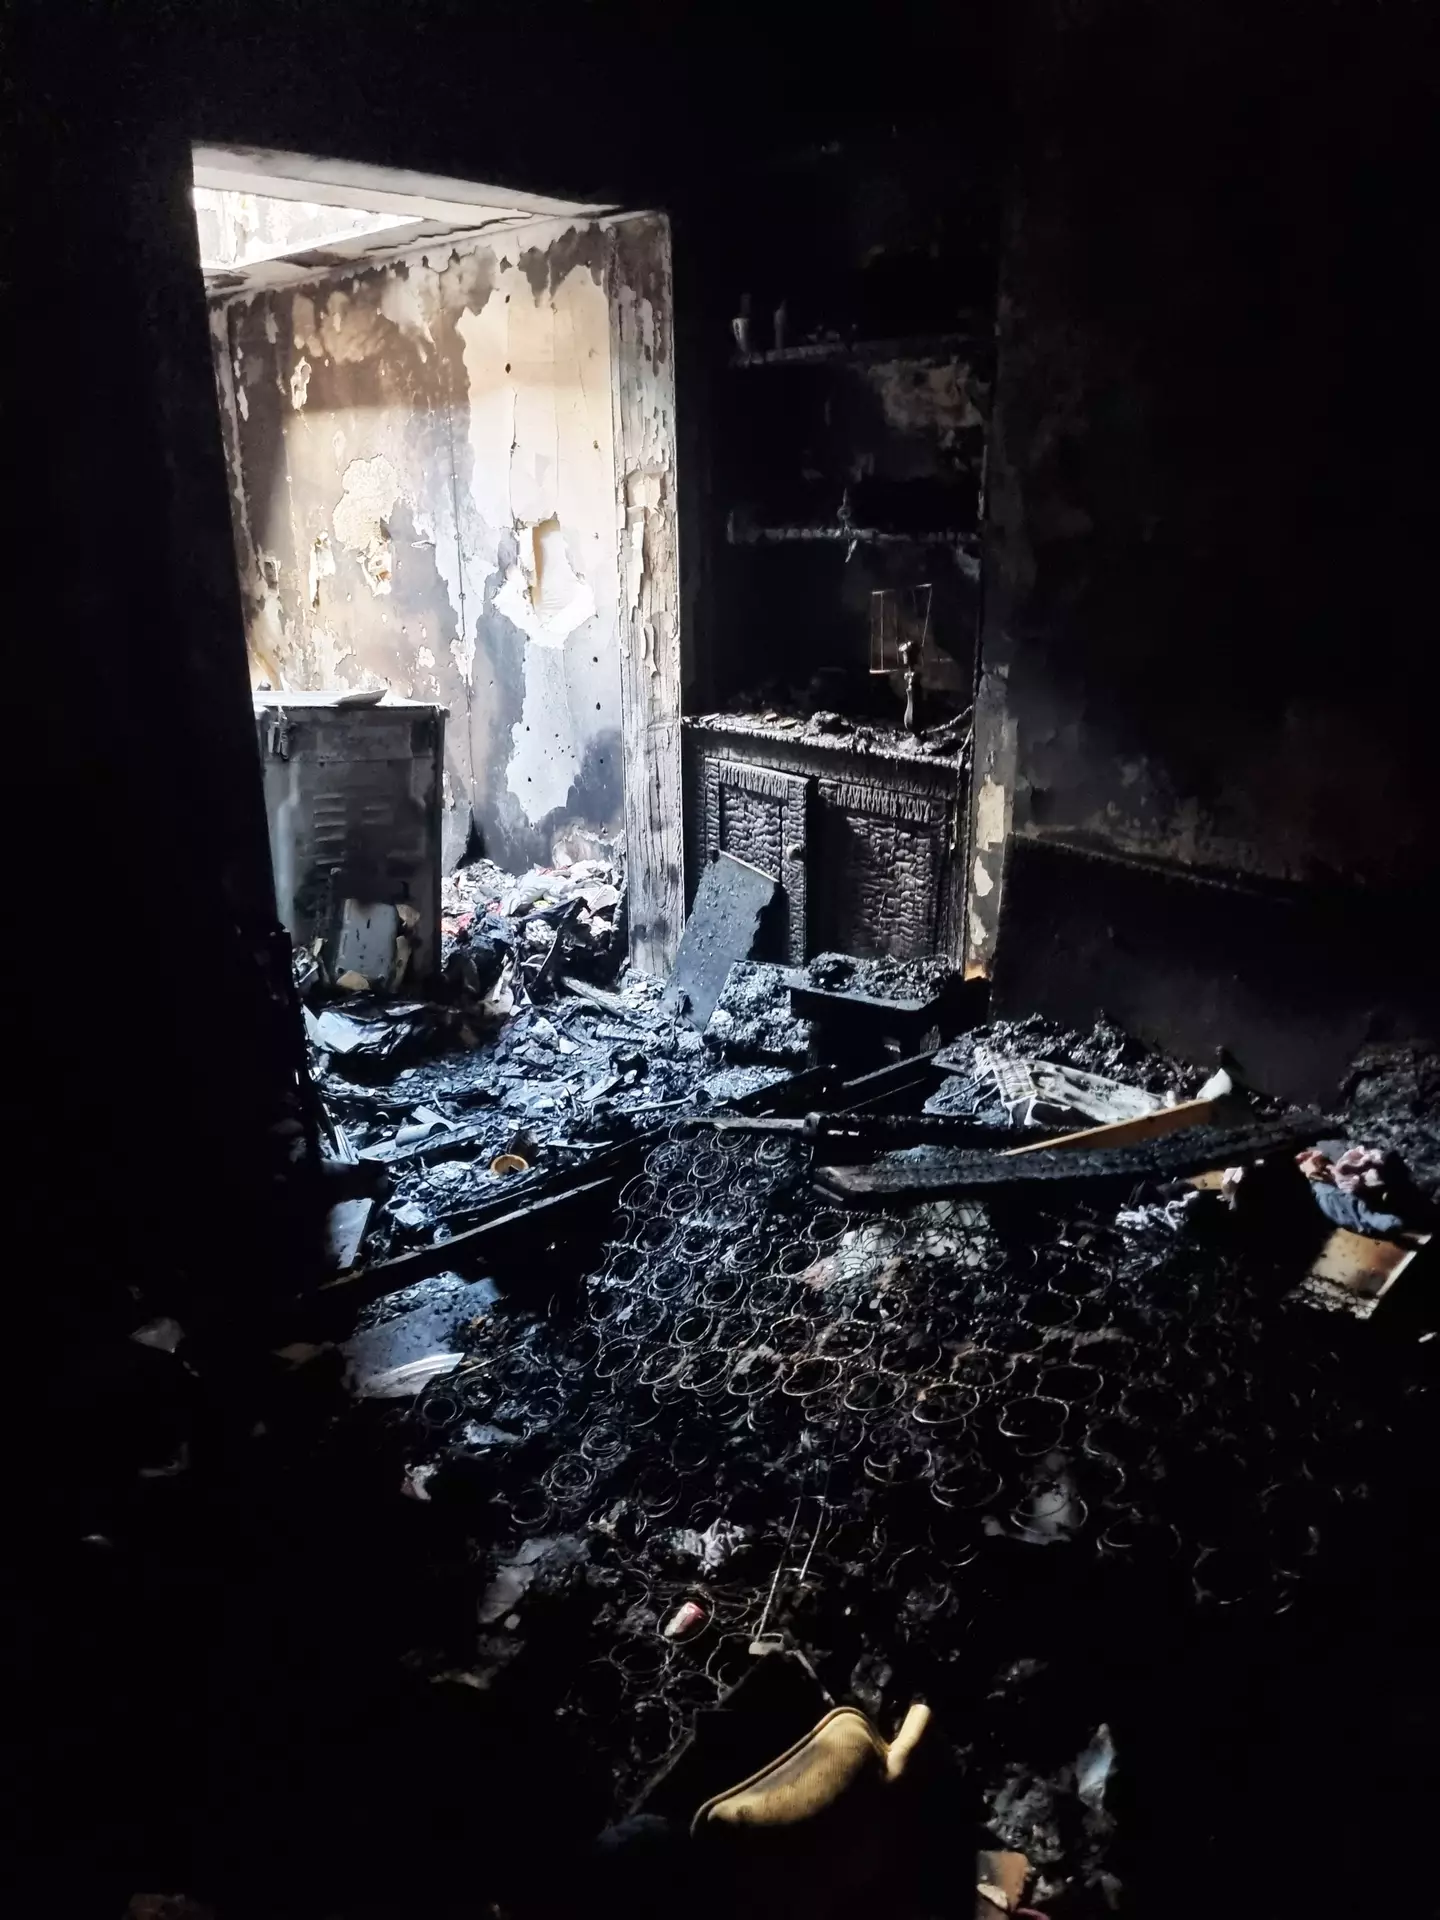 She shared photos of how a £13 candle started a fire in her daughter's bedroom.